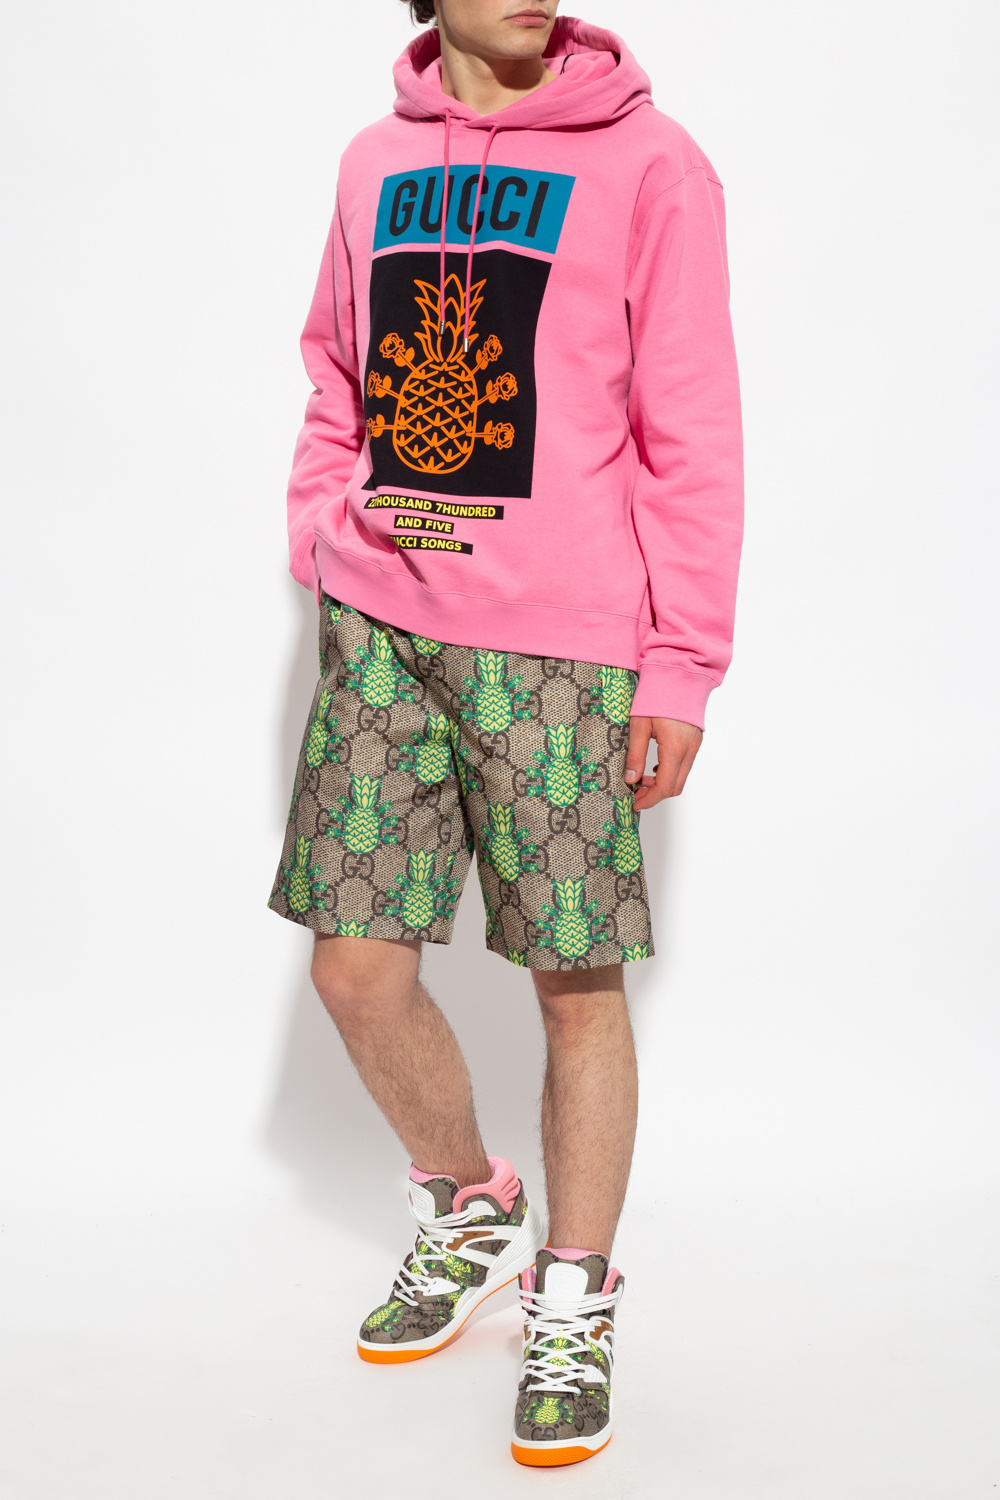 gucci Soon The ‘gucci Soon Pineapple’ collection hoodie